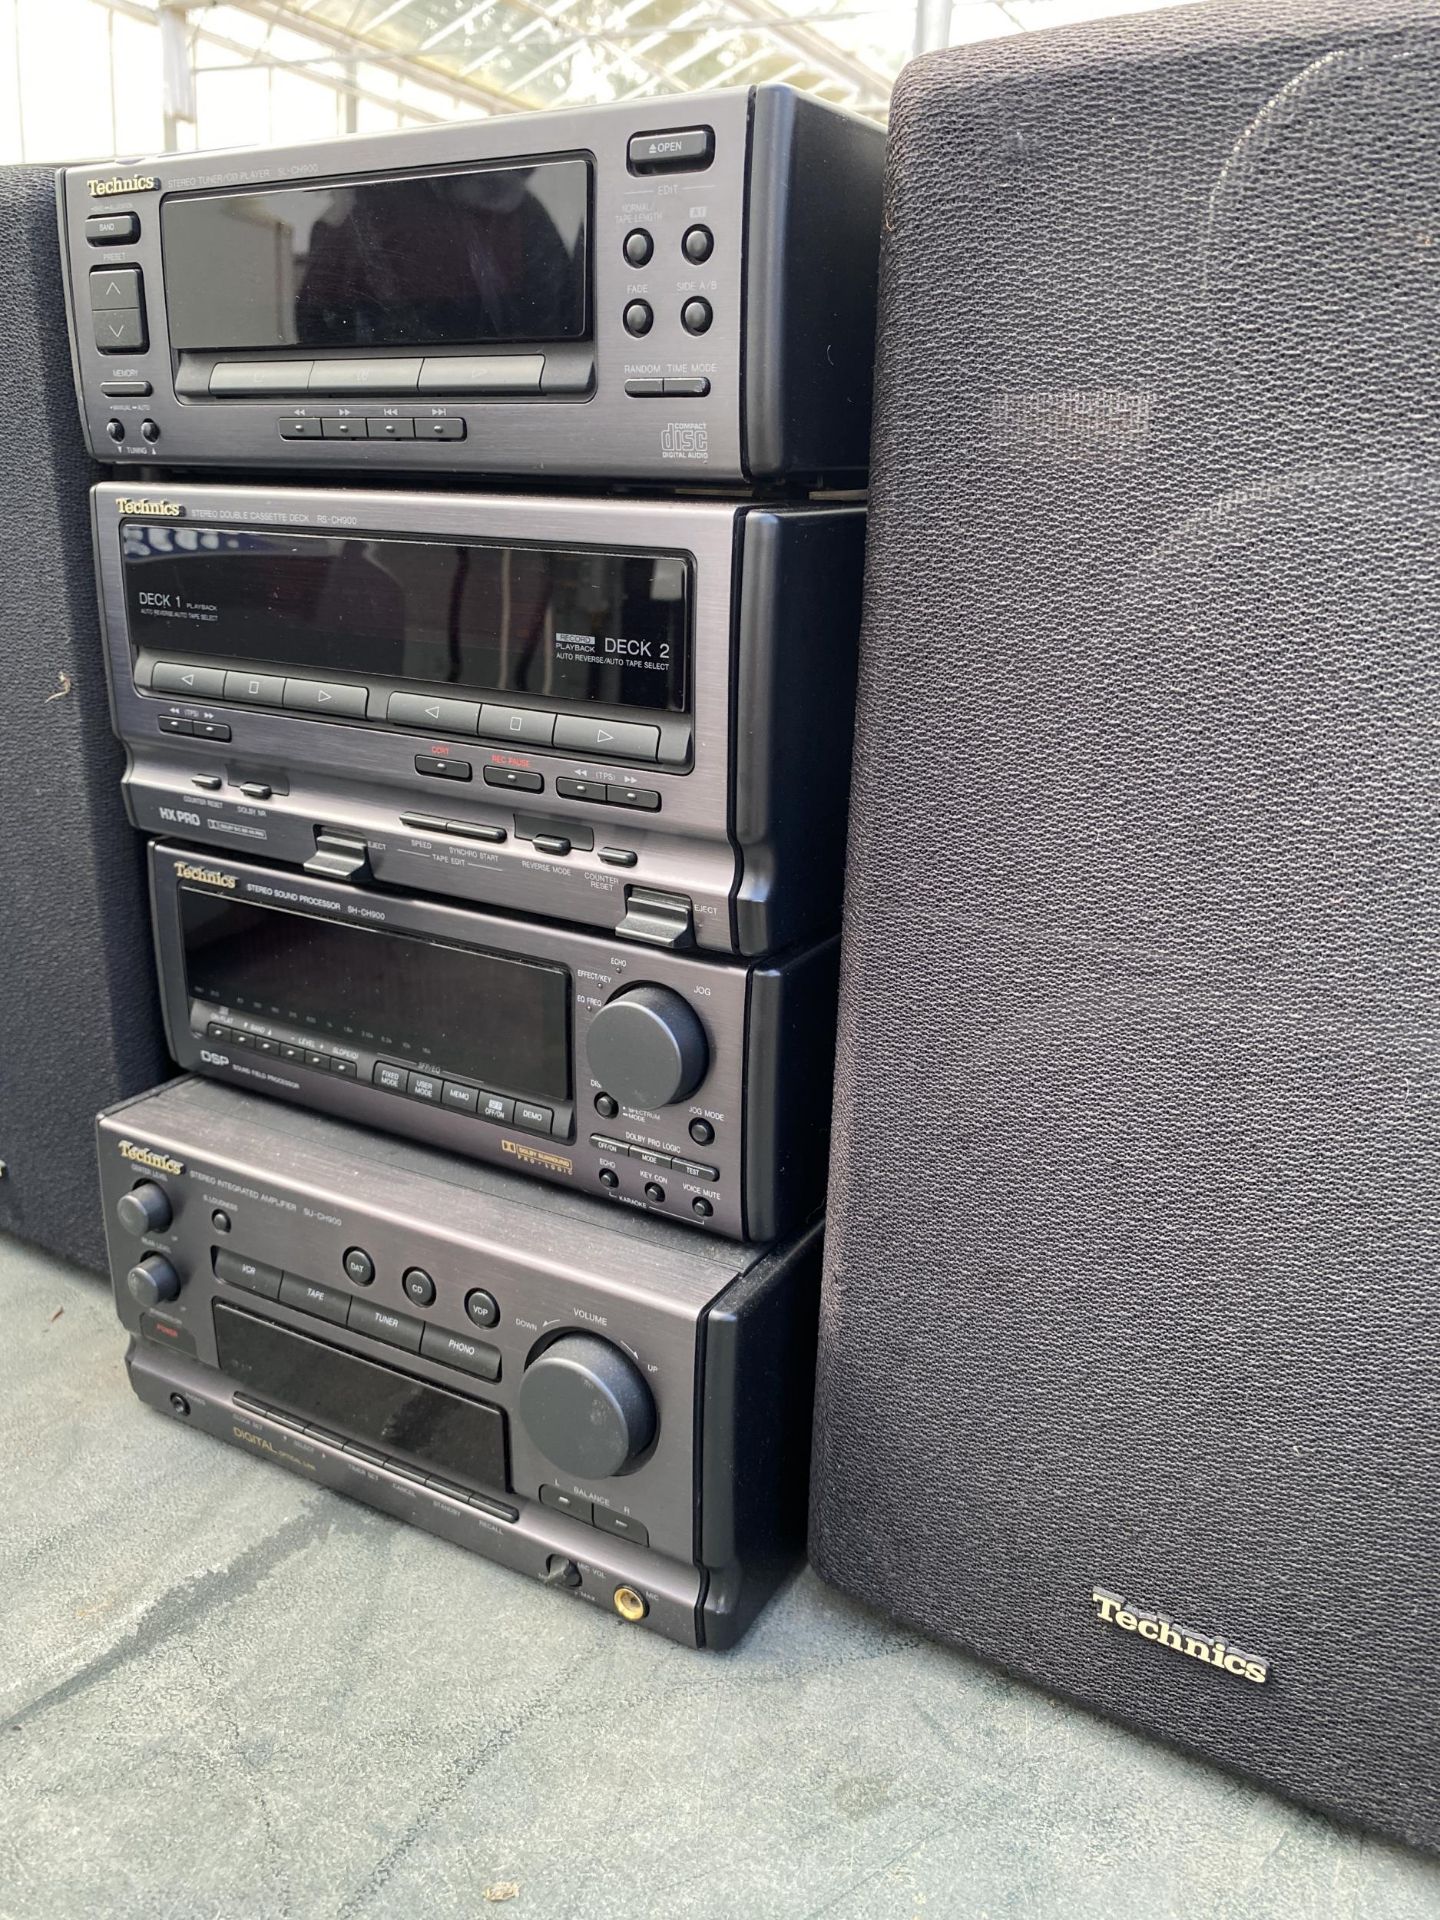 A TECHNICS STEREO TUNER/CD TRIPPLE DECK SYSTEM - Image 2 of 2